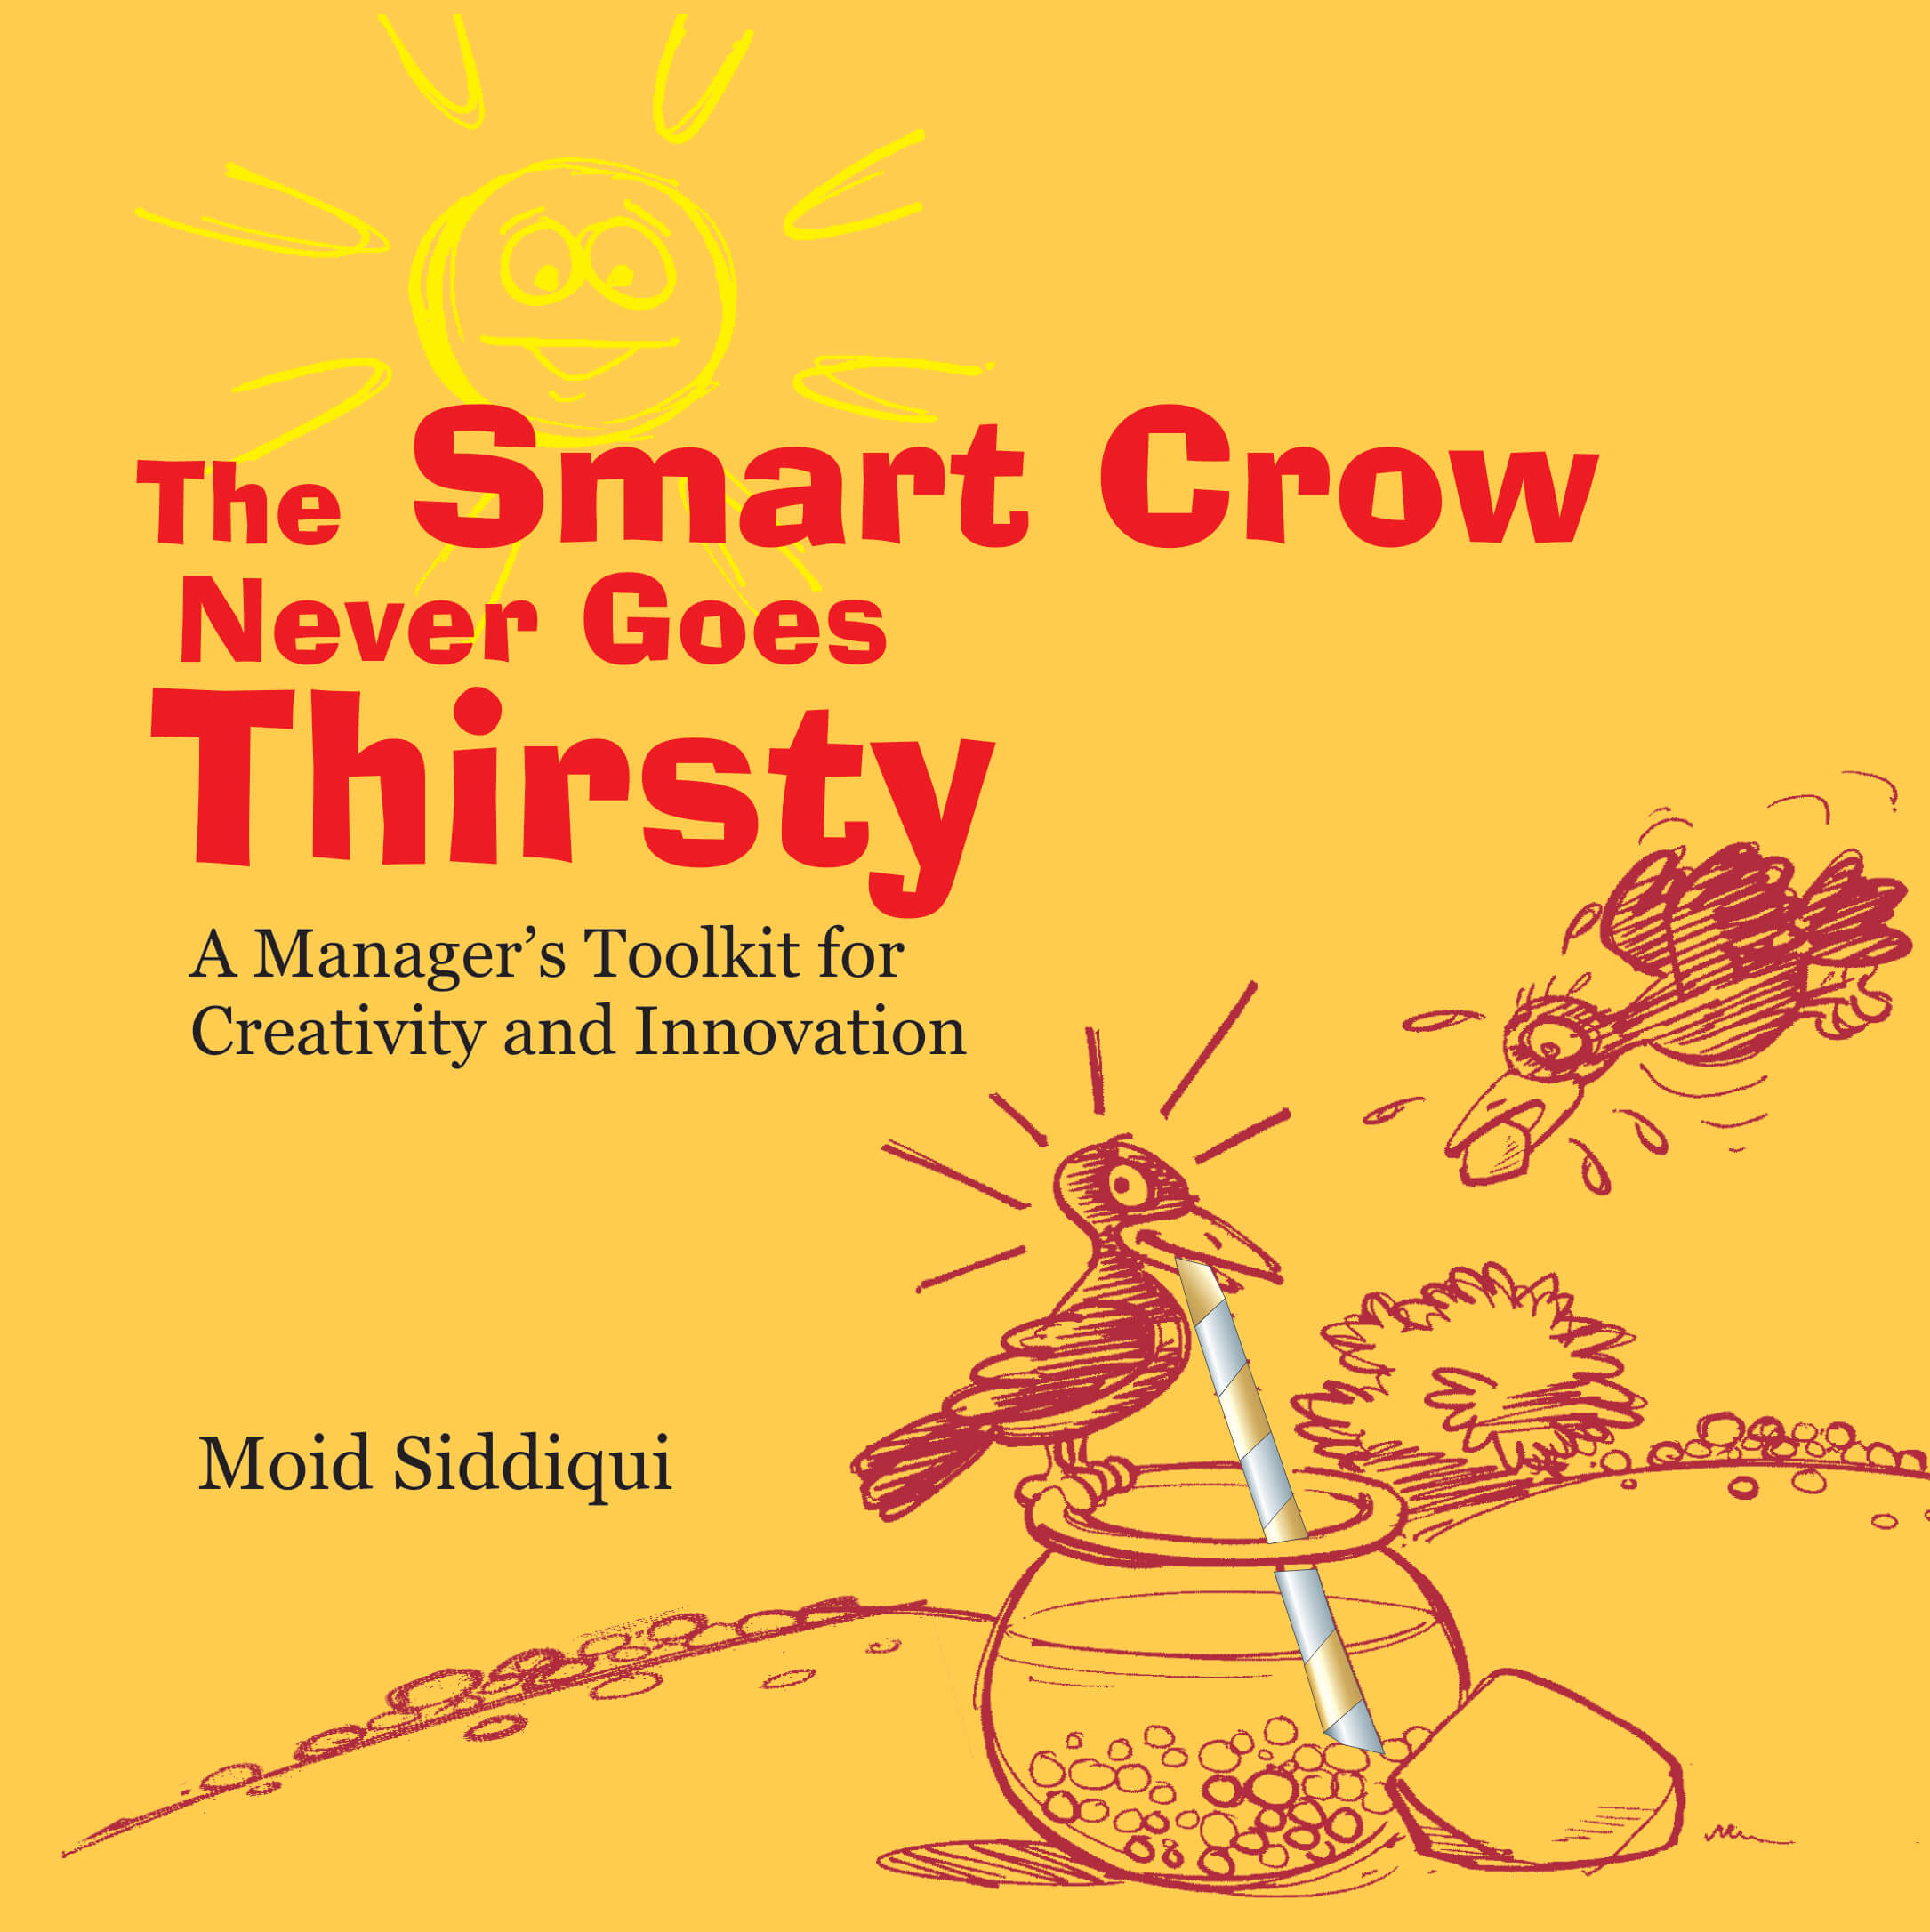 The Smart Crow Never Goes Thirsty: A Manager's Toolkit For Creativity And Innovation